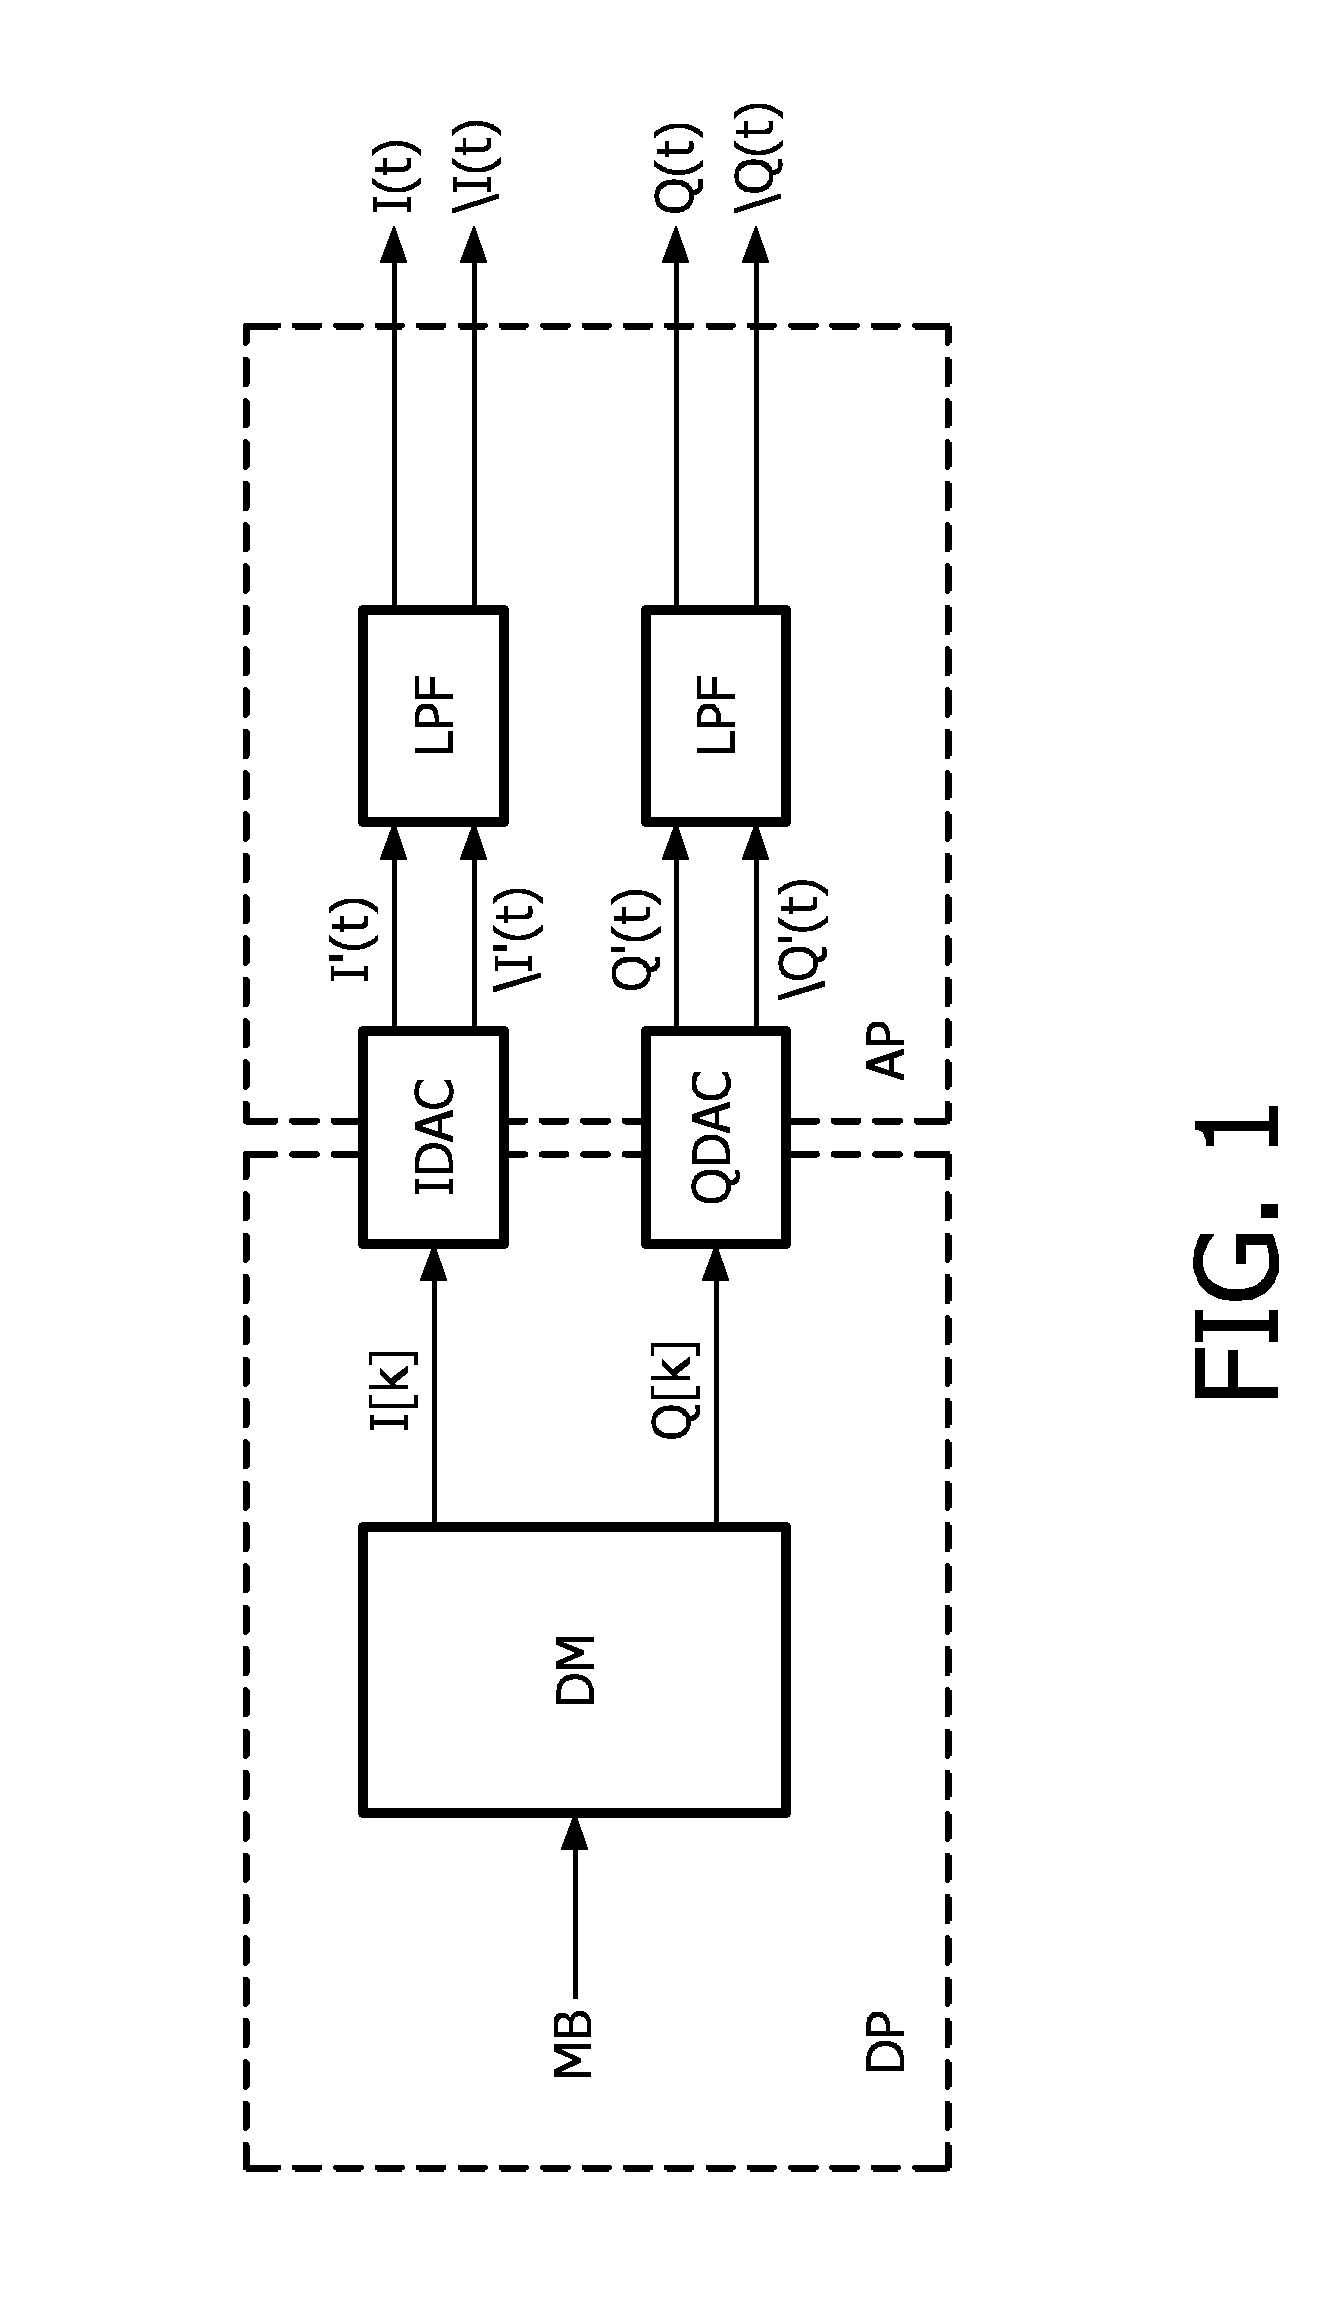 Transmitter with delay mismatch compensation